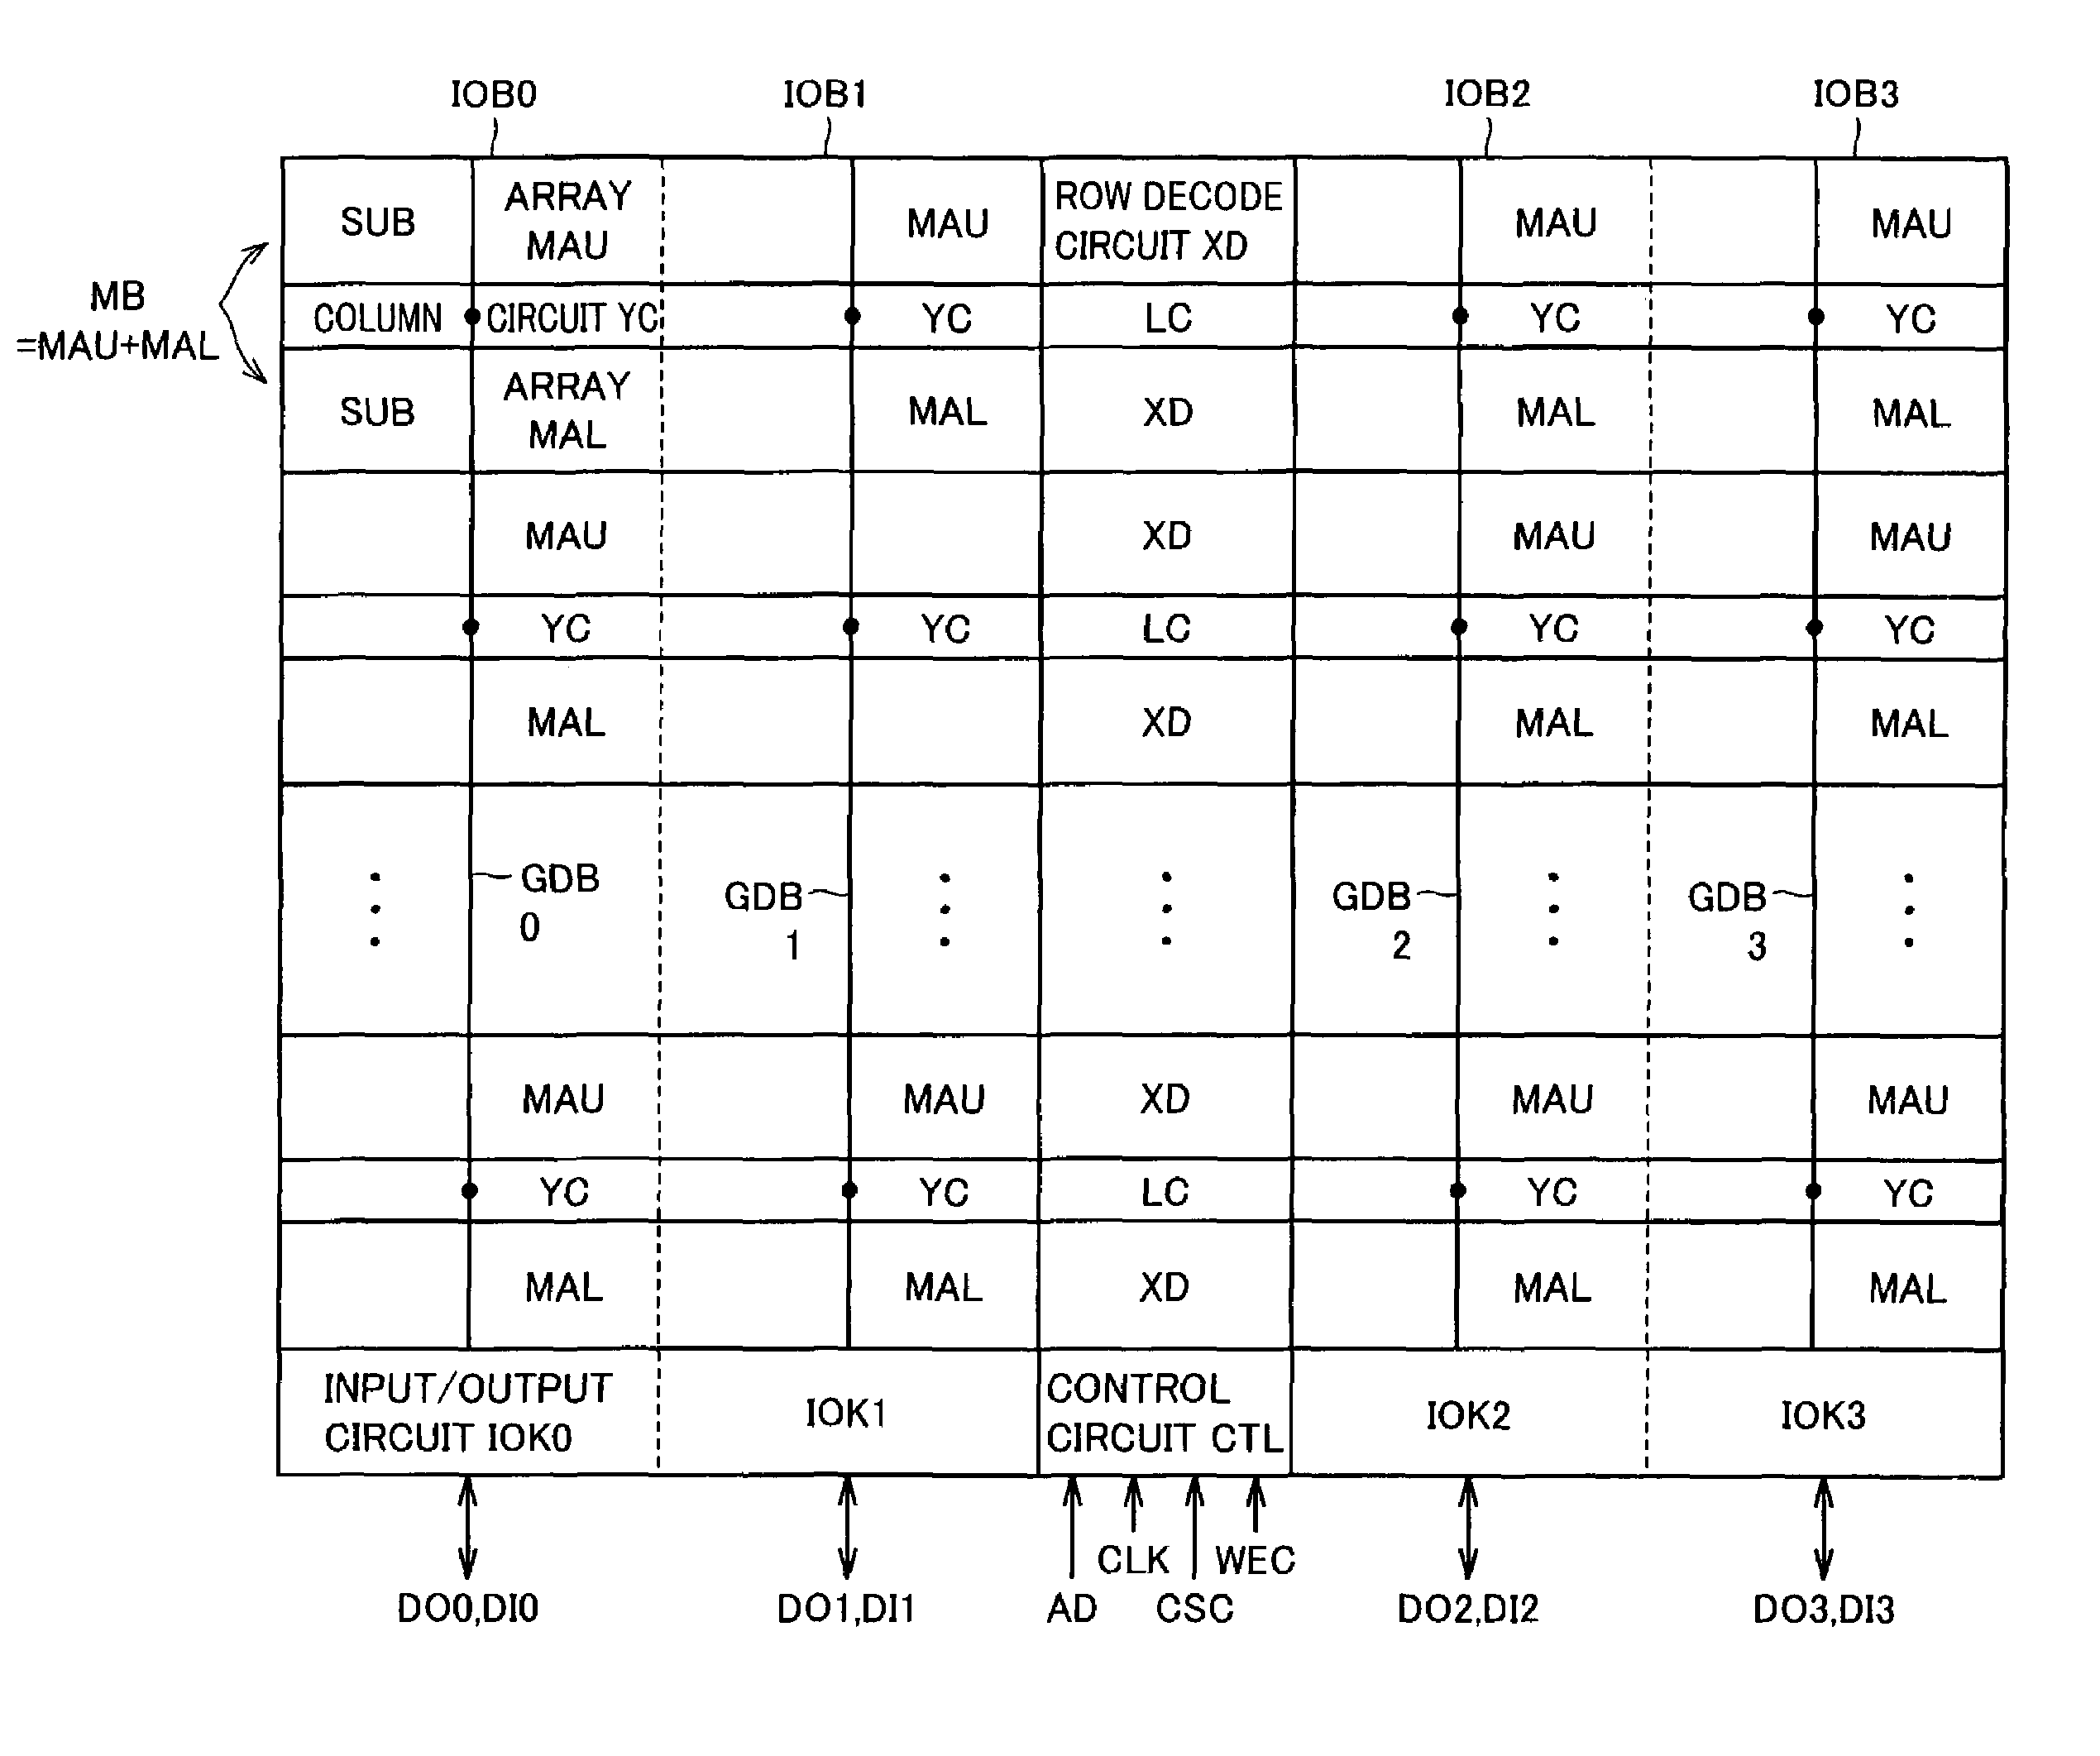 Semiconductor memory device allowing high-speed data reading